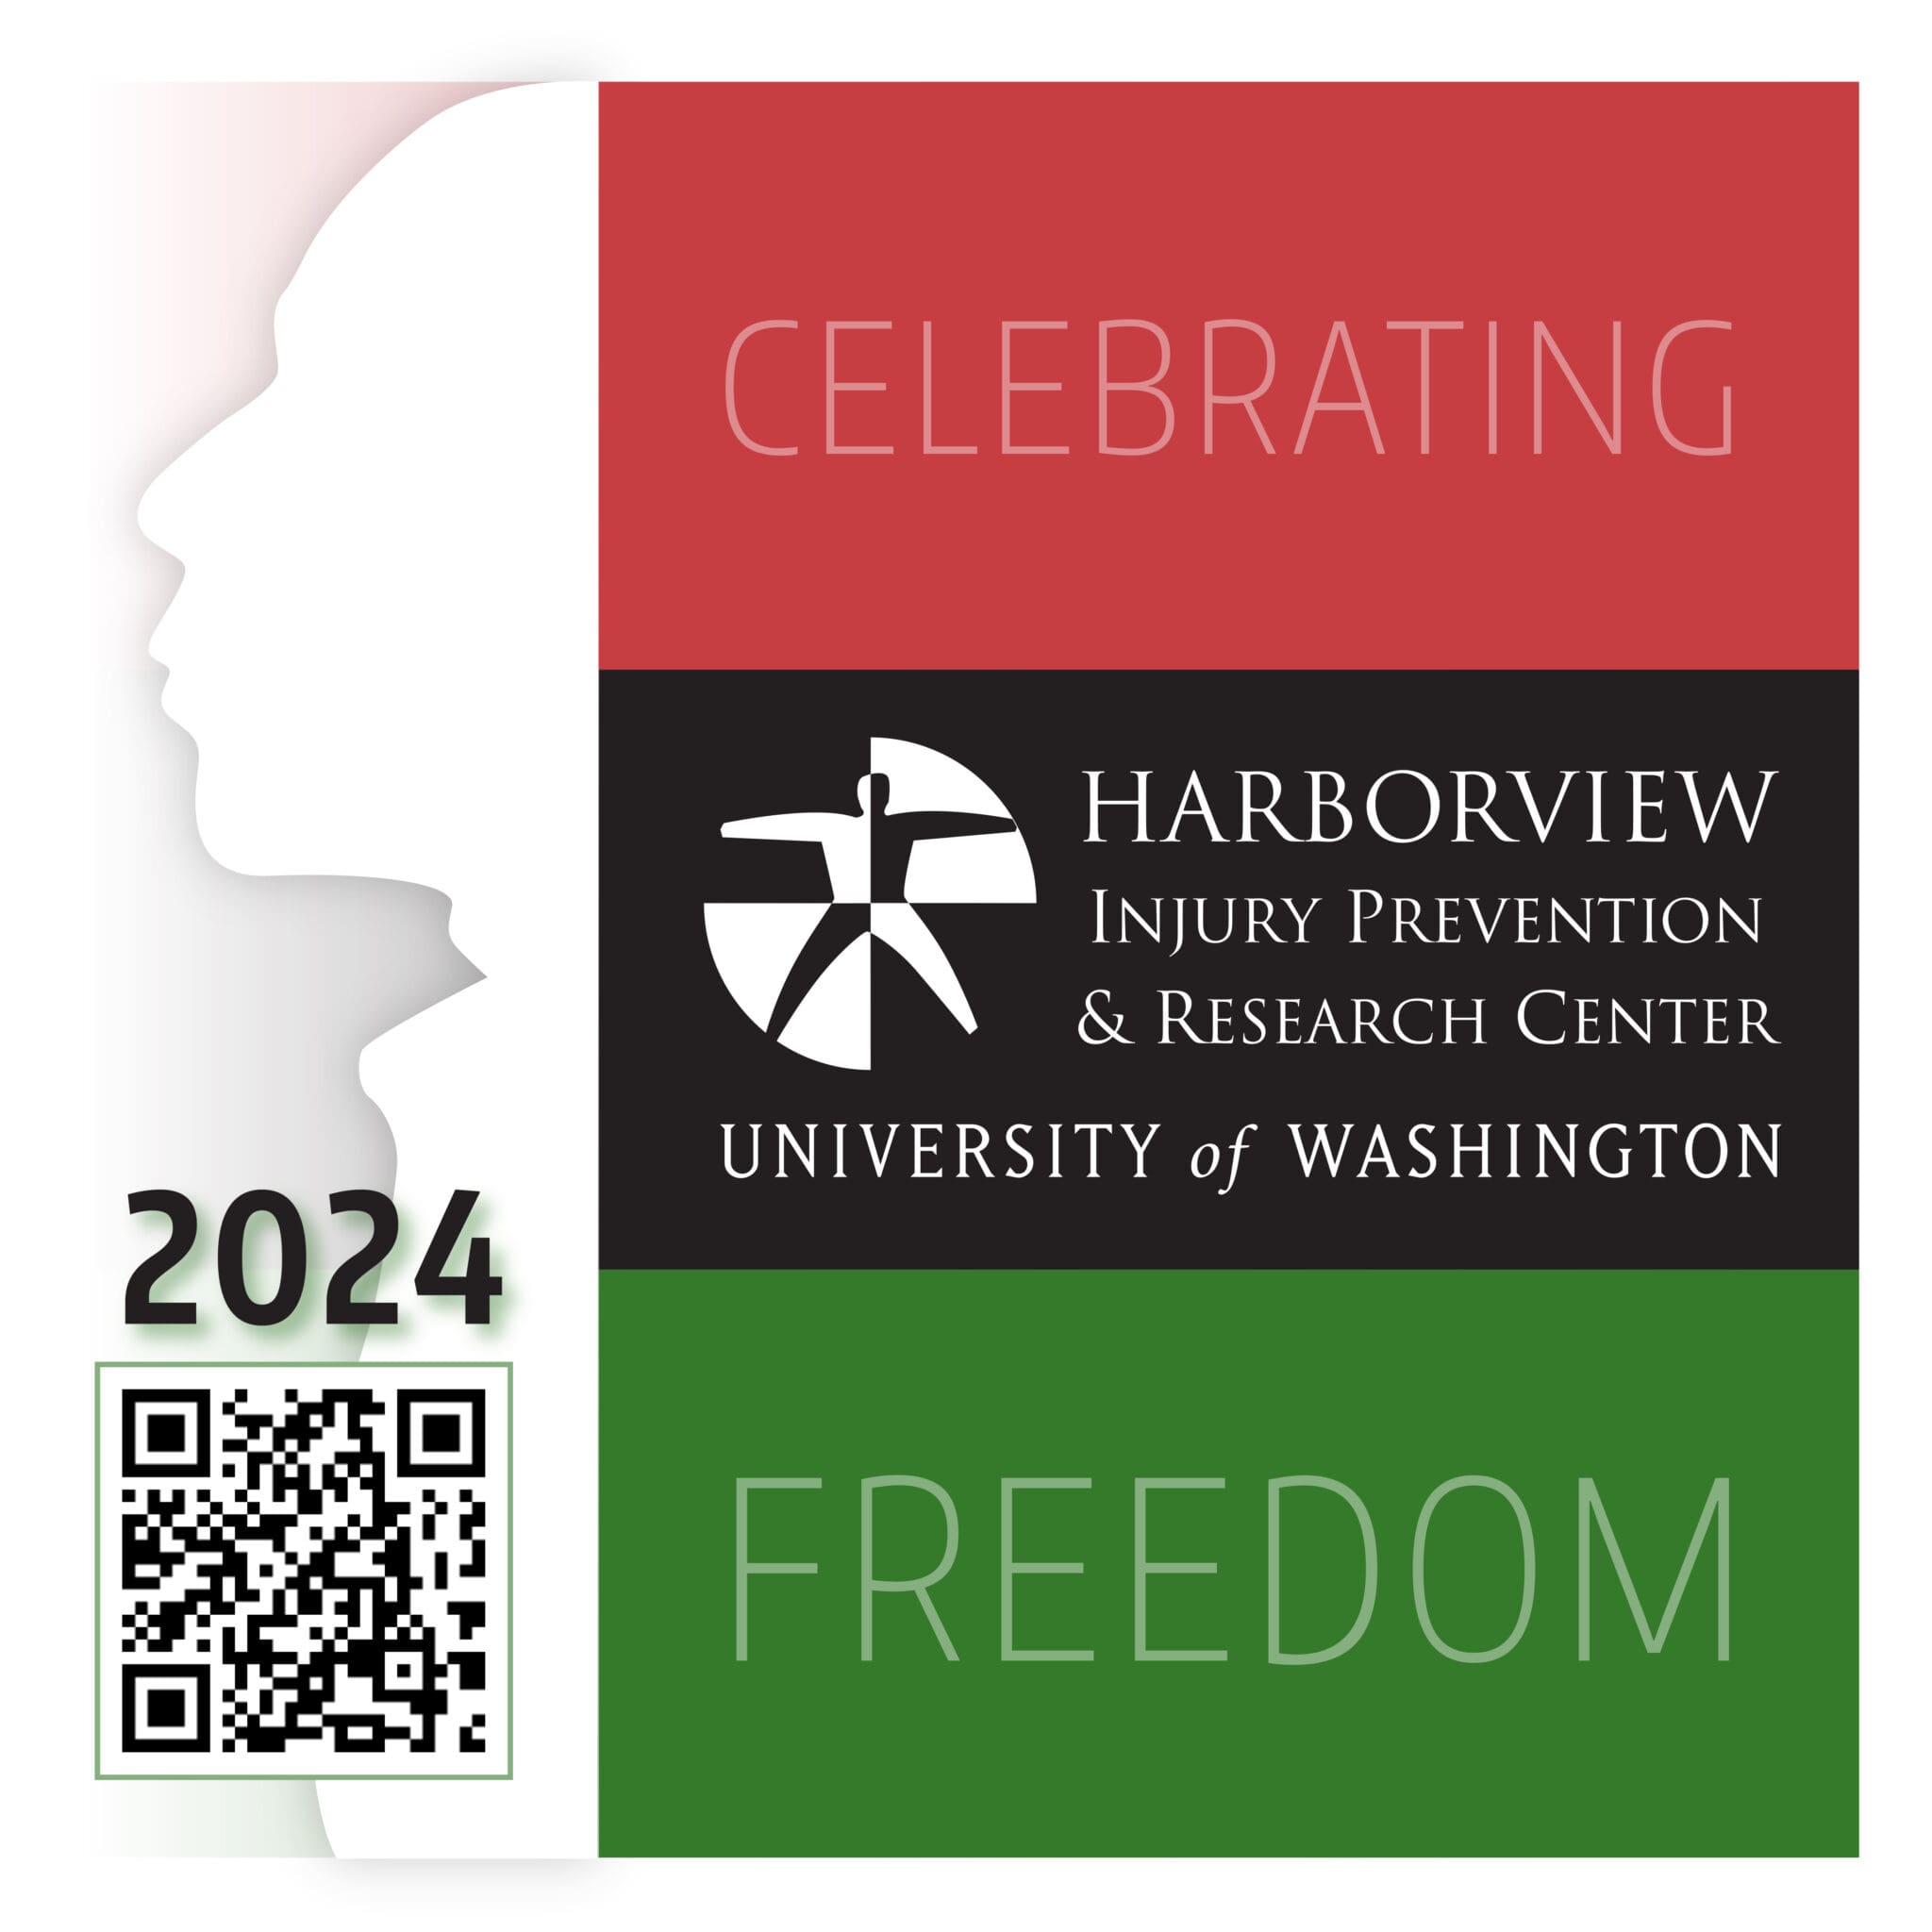 Image conveys "Celebrating Freedom" theme. Side profile of blank silhouette peers out from three bands of color stacked in order of red, black & green. The Harborview Injury Prevention & Research Center, University of Washington logo reversed in white (at center) and "2024" with QR Code in black (at bottom left).